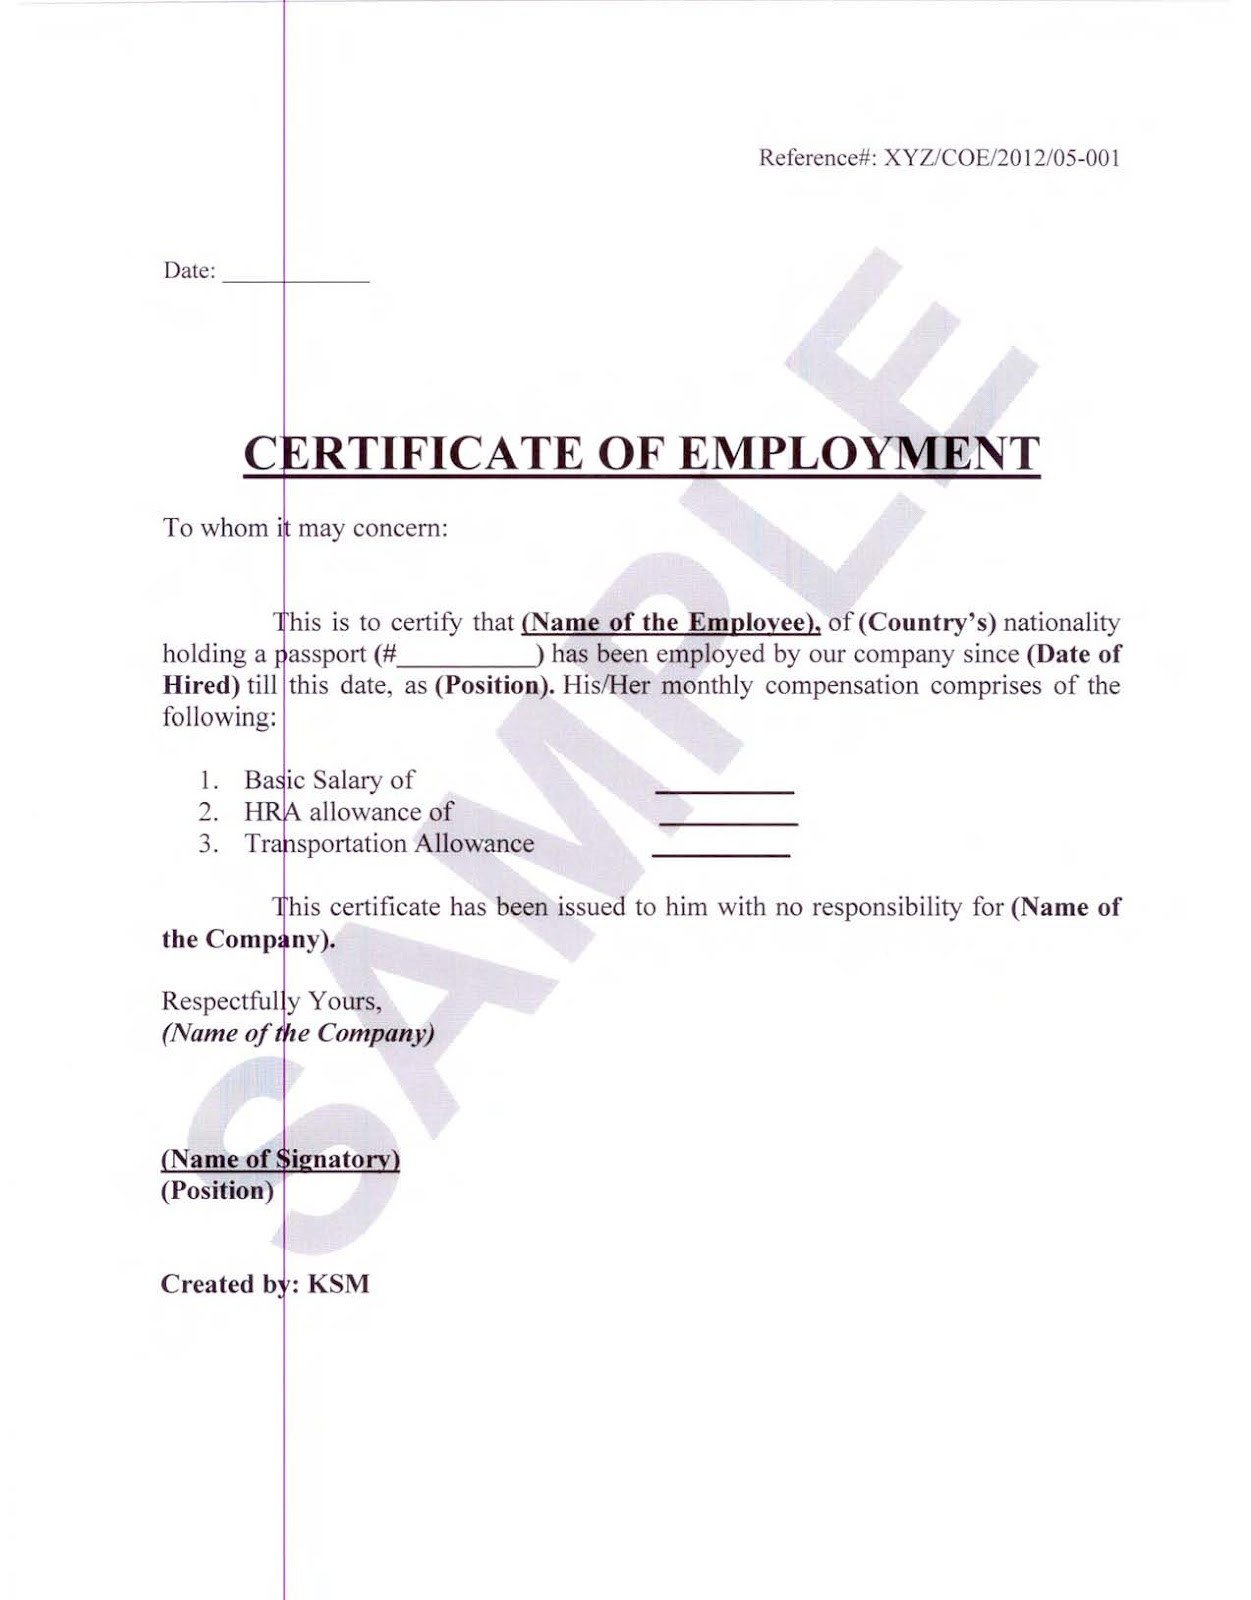 Certificate Of Employment form Money Business People Travel and Pleasure Certificate